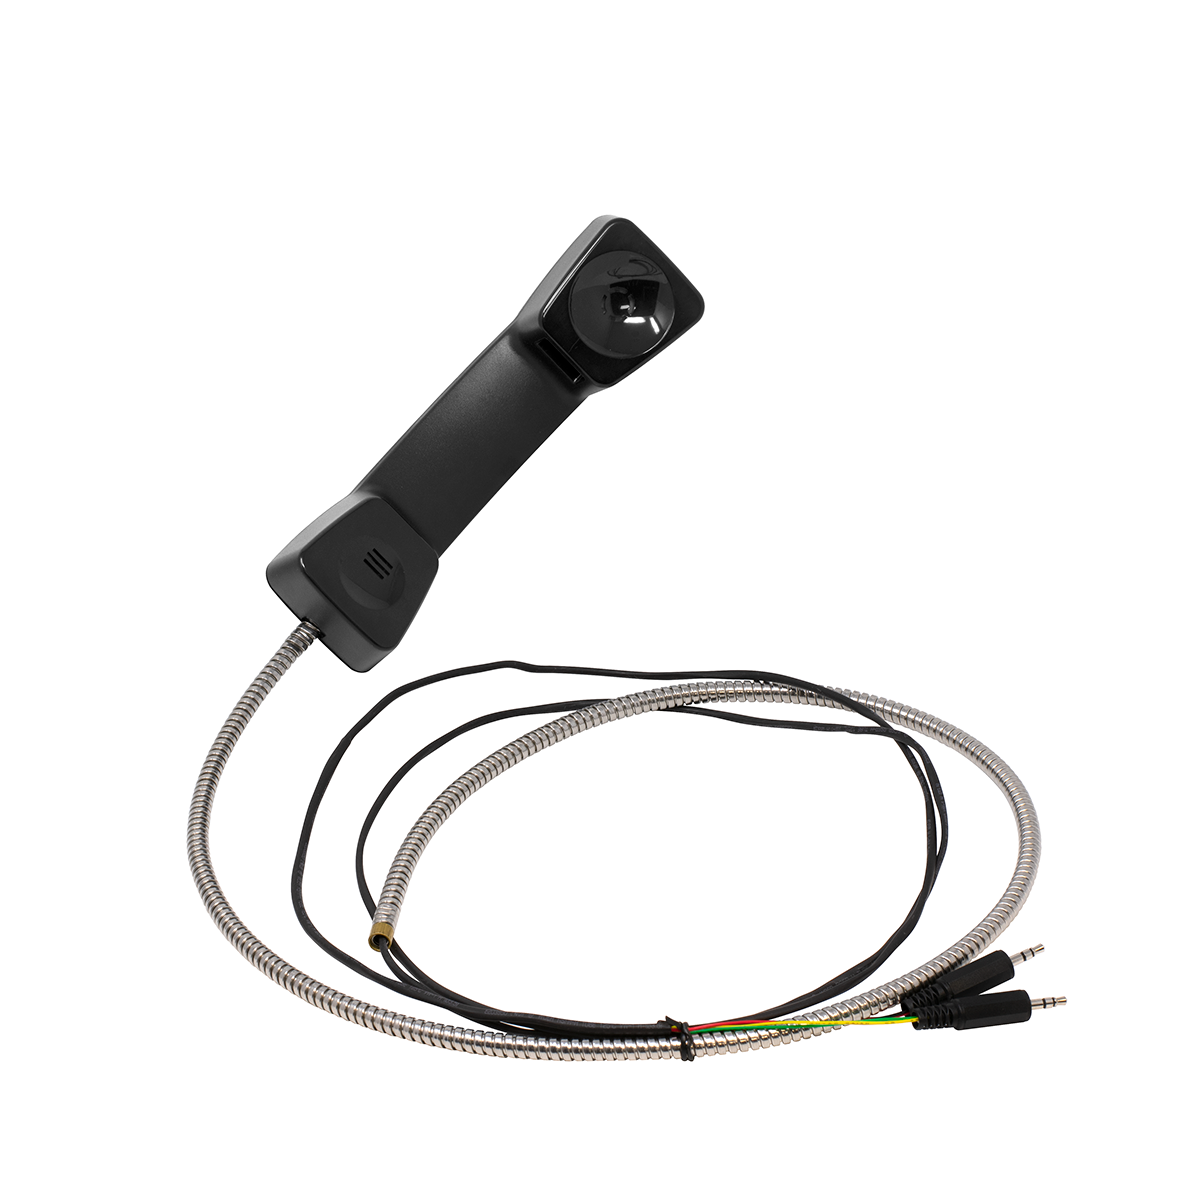  Black Euro PC Handset with Armored Cord